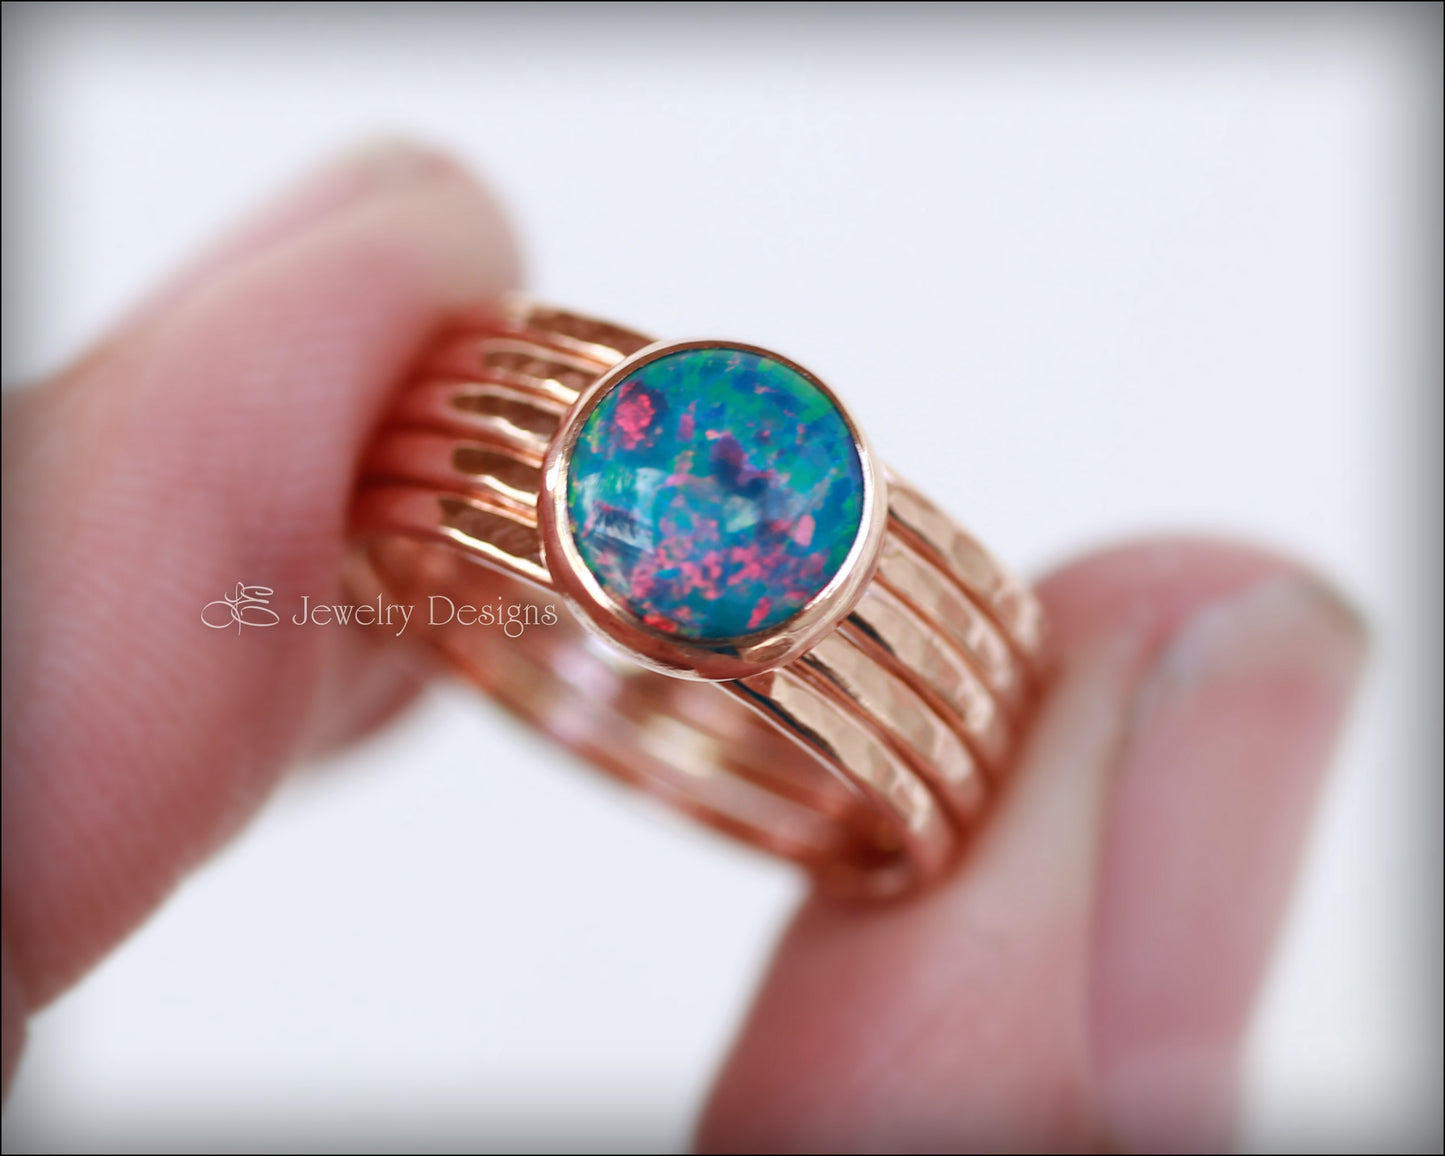 Load image into Gallery viewer, Opal Stacking Ring Set - (sterling, 14k gold-filled) - LE Jewelry Designs
